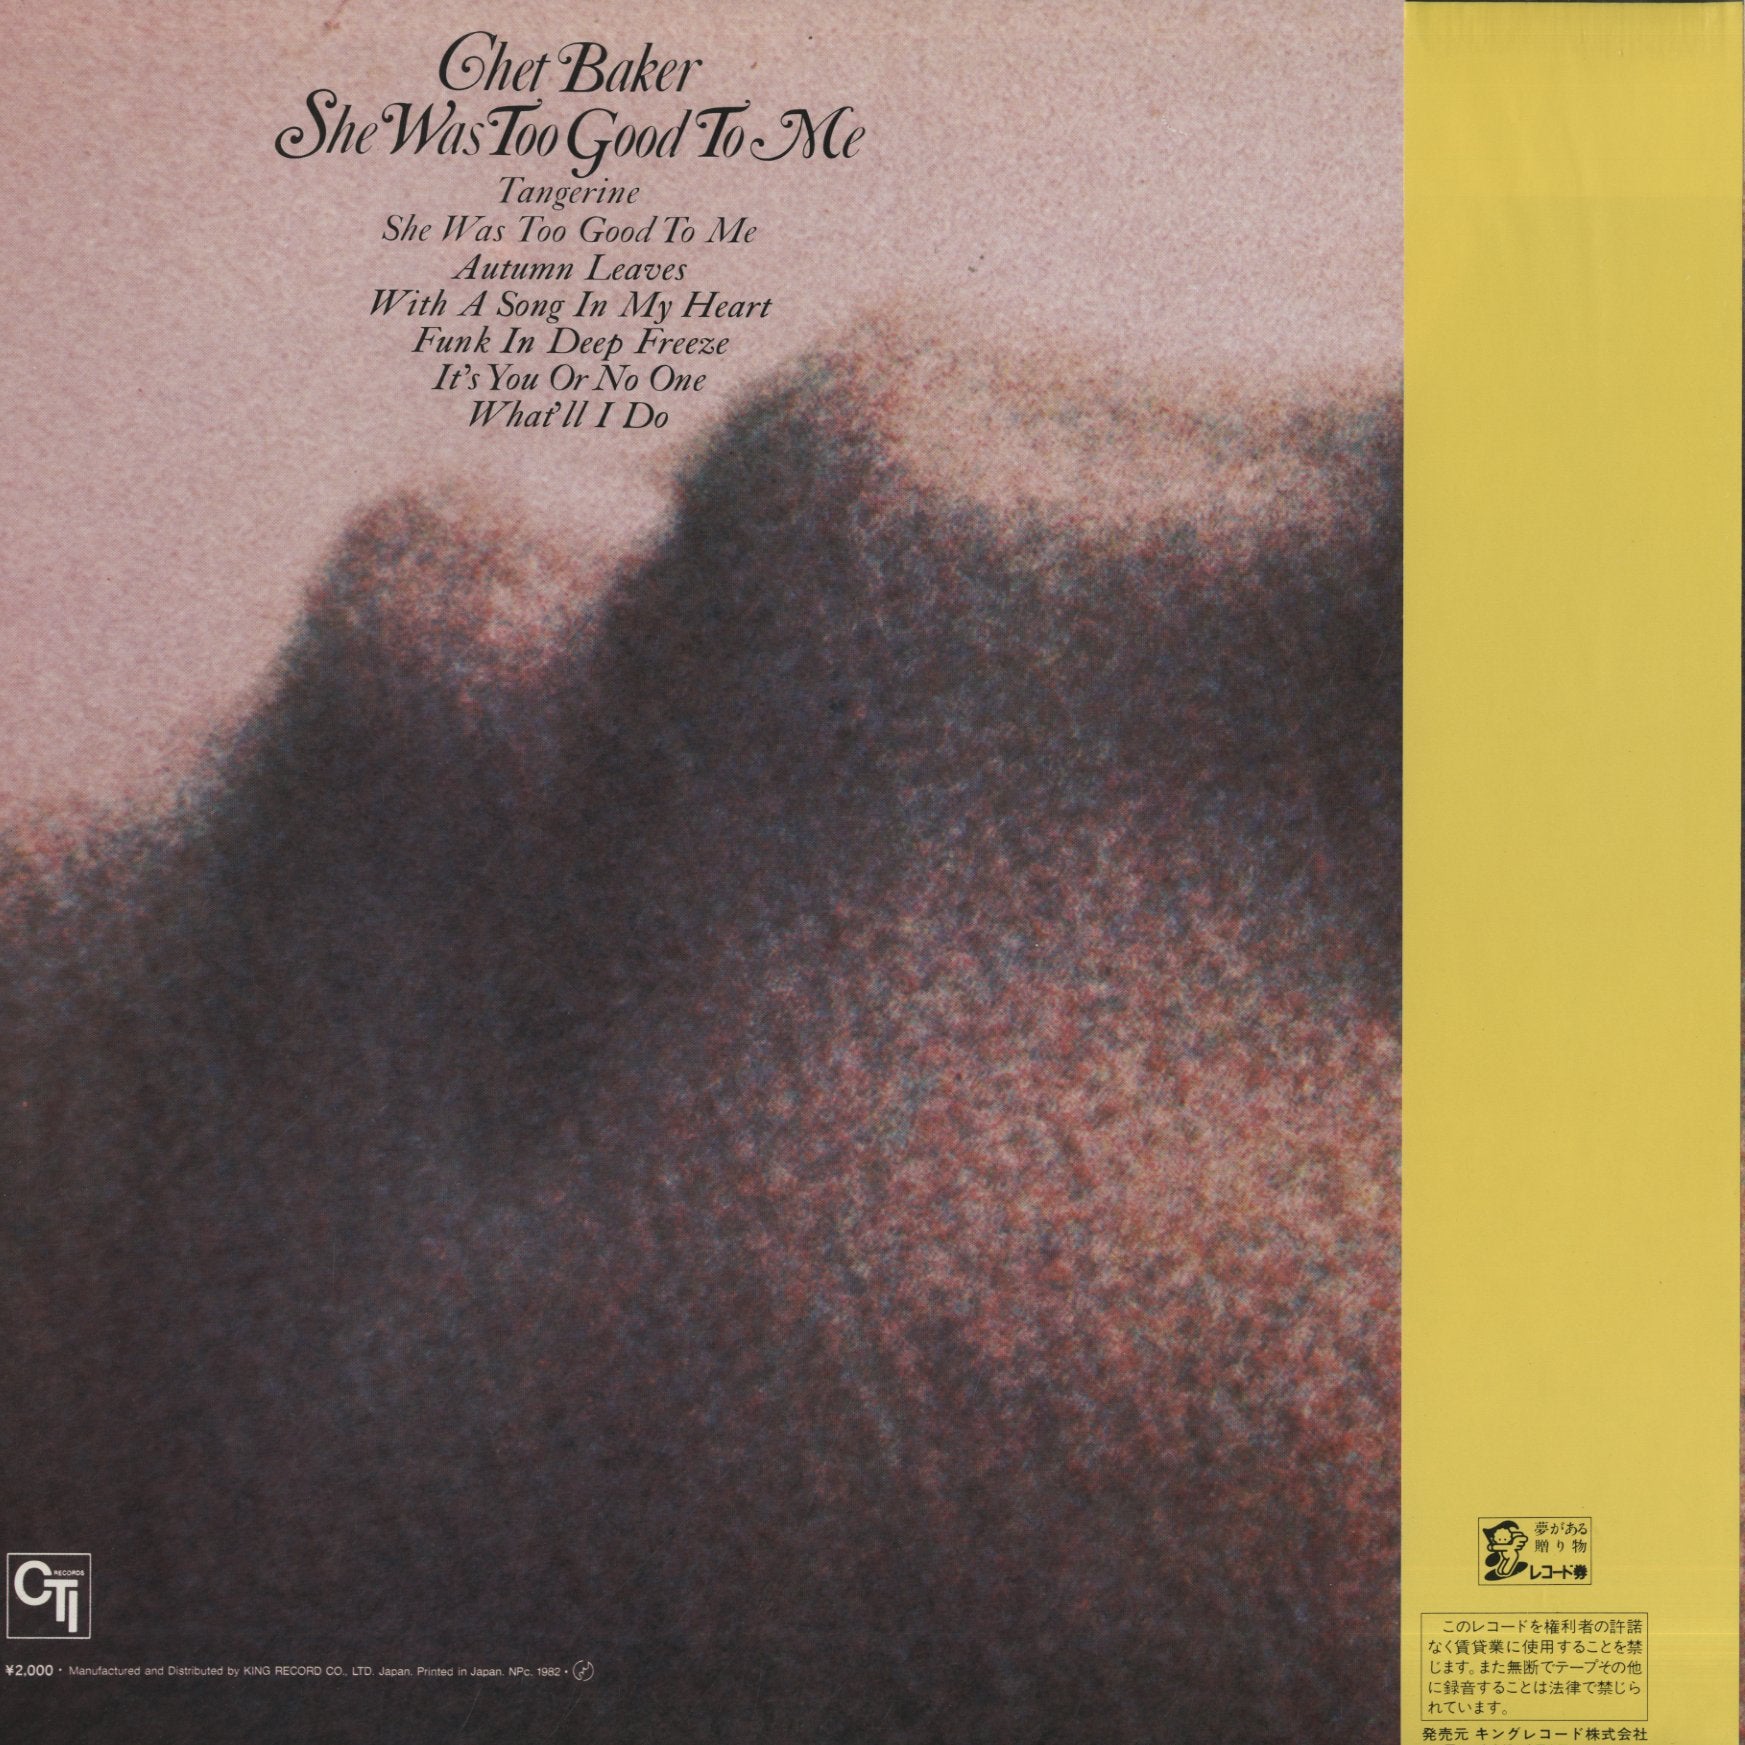 Chet Baker / チェット・ベイカー / She Was Too Good To Me (K20P6819 